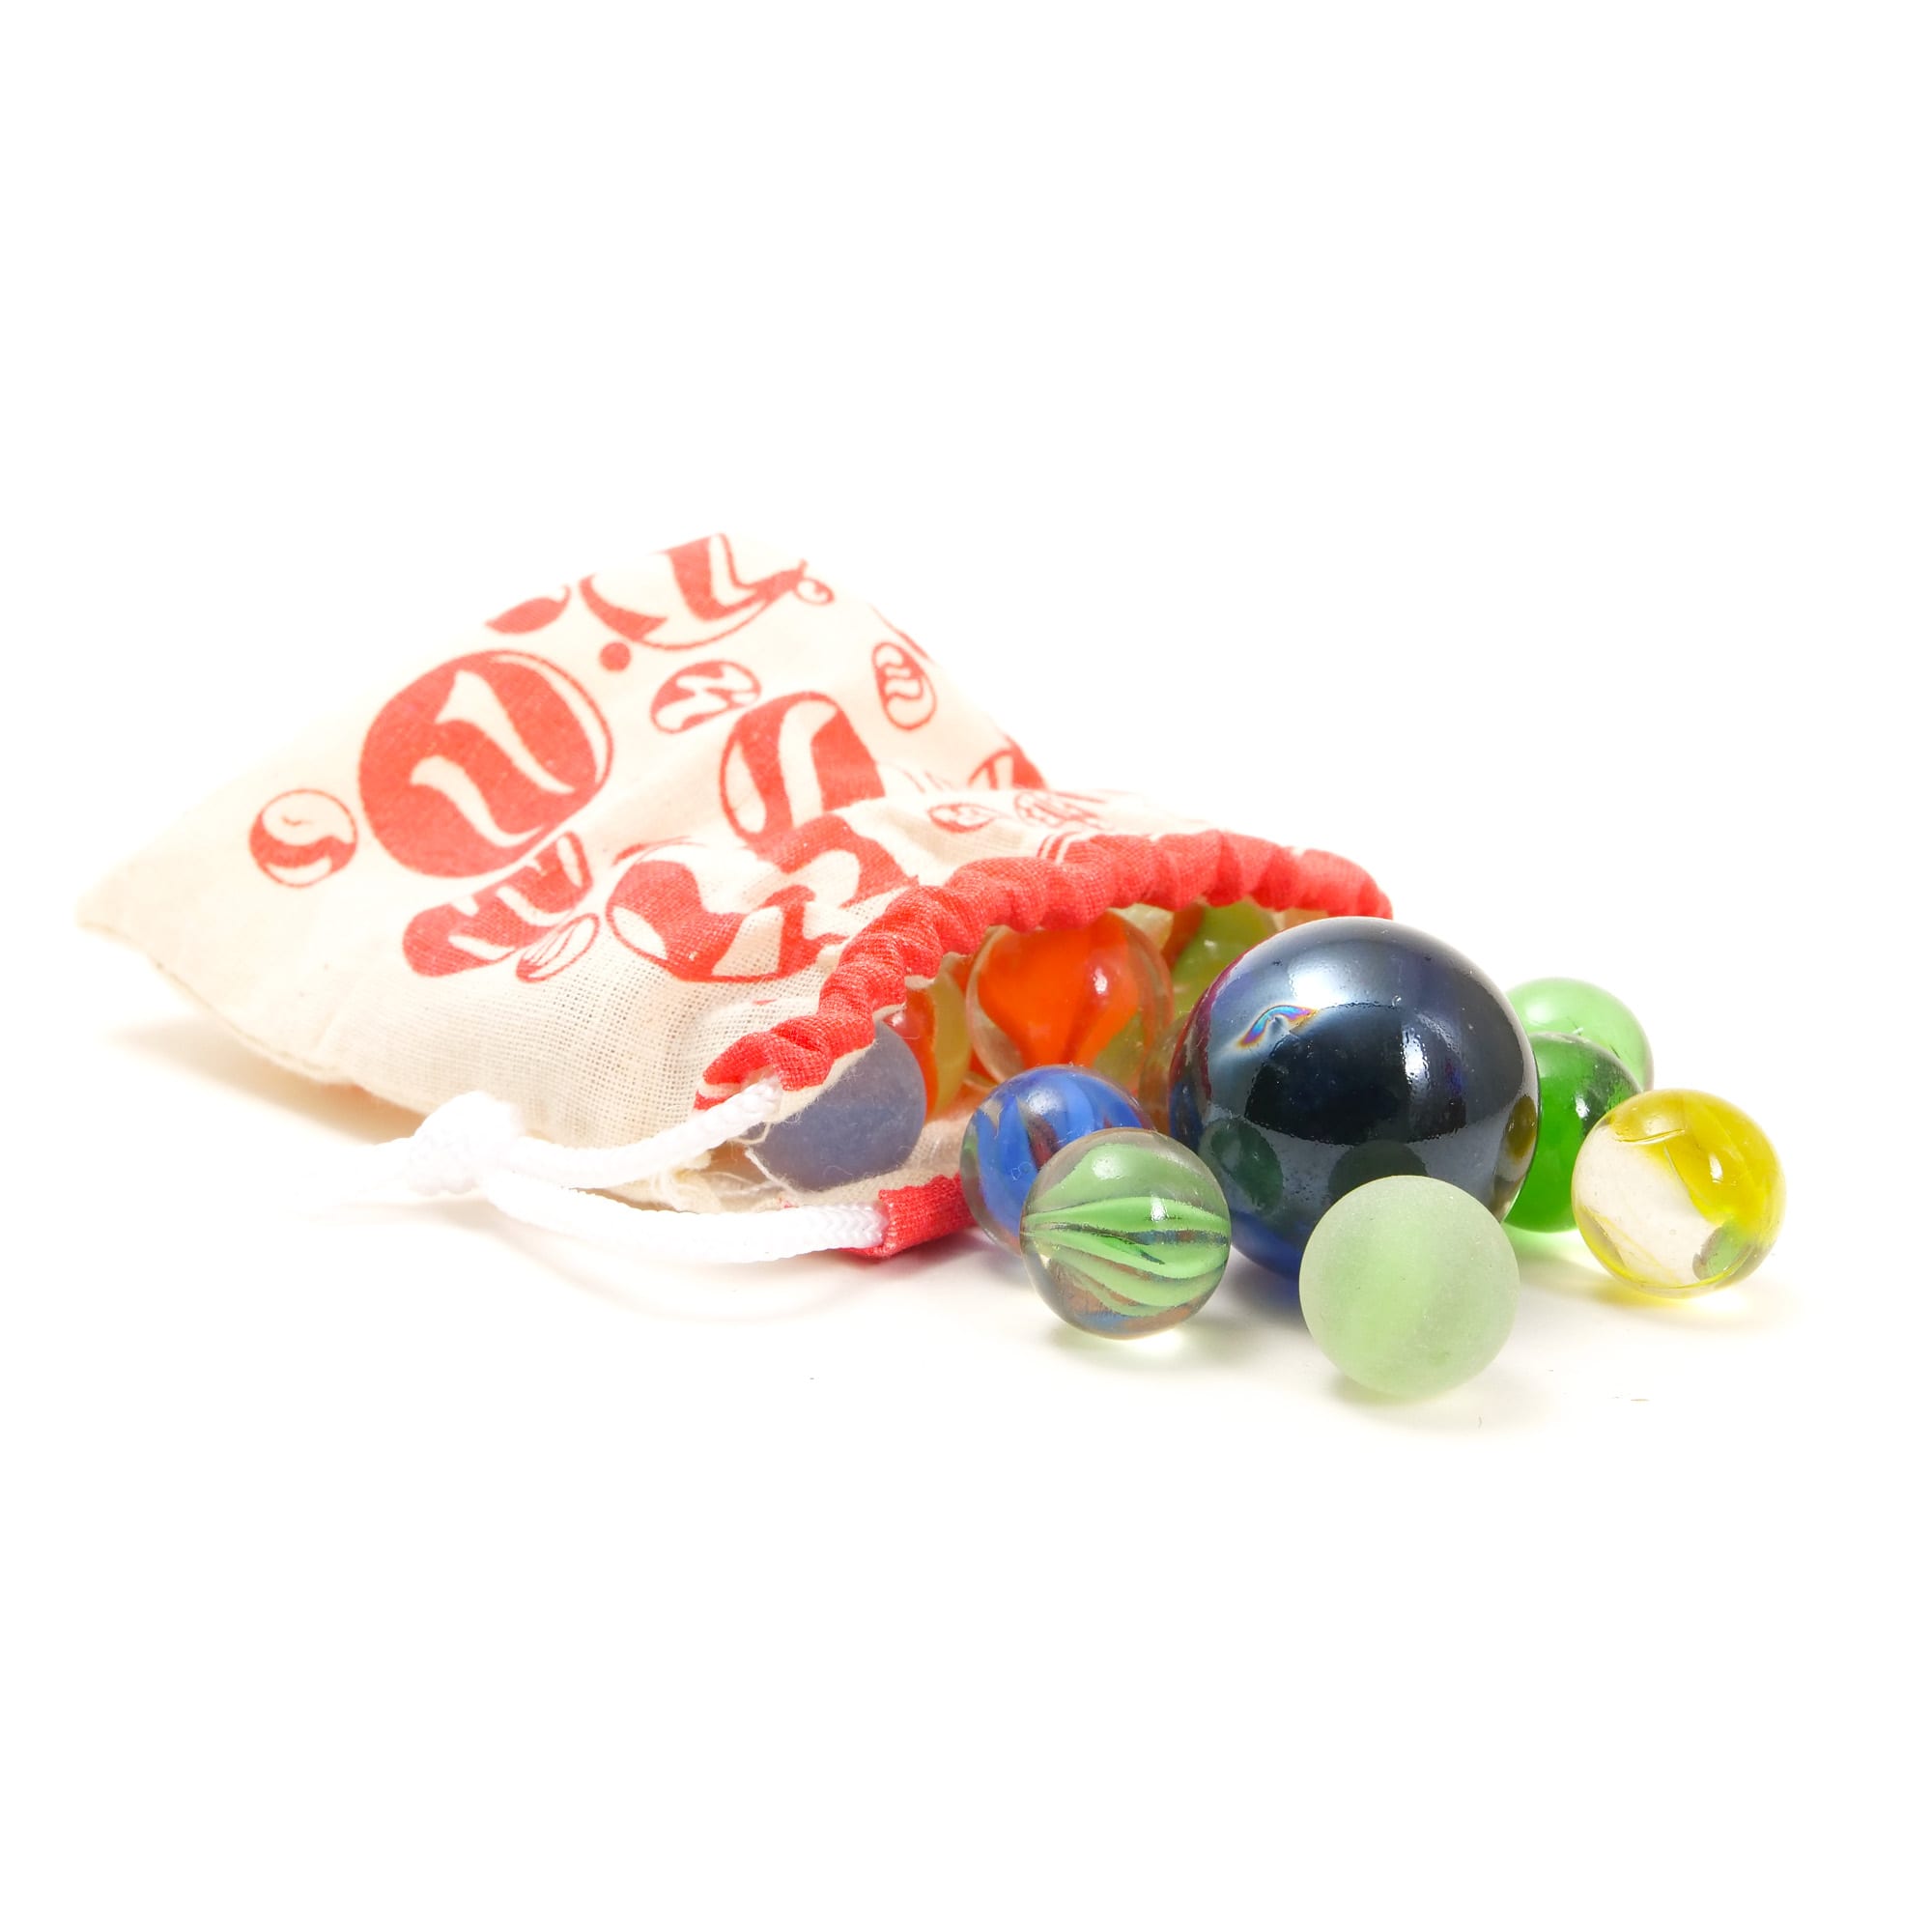 Gifts Bag Of Marbles Beautiful Little Cotten Bag Of Colorful Marbles Marbles 